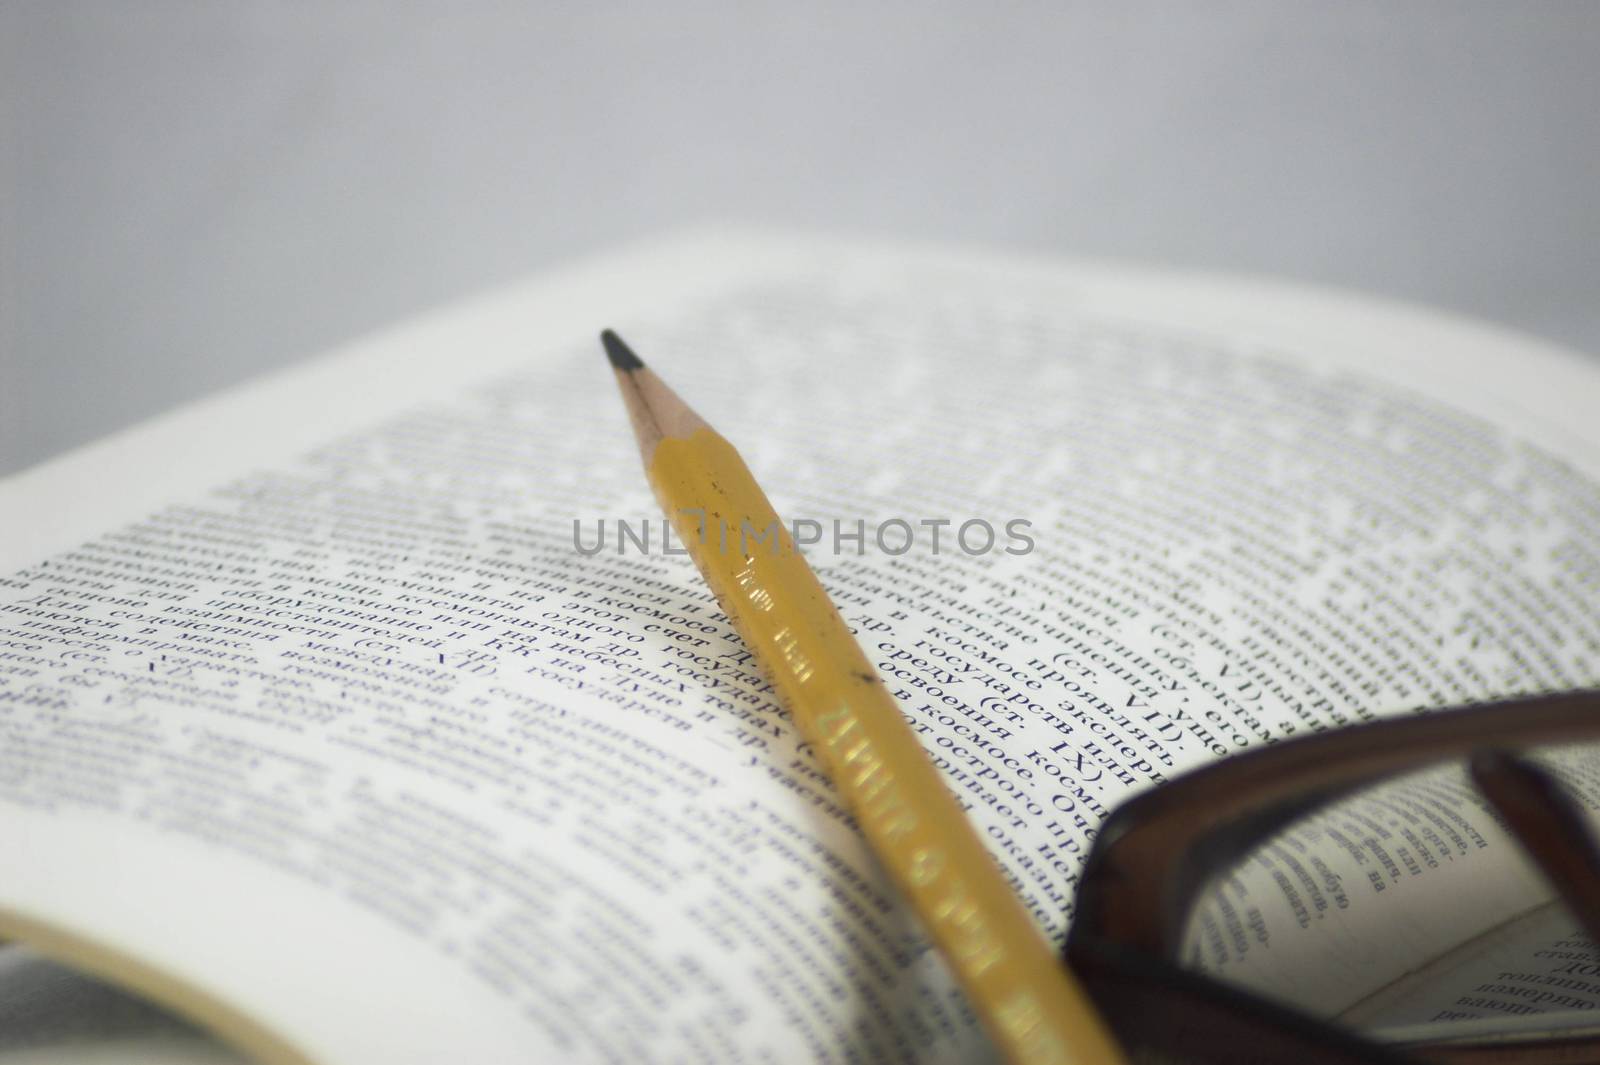 Pencil and glasses on a book by javax